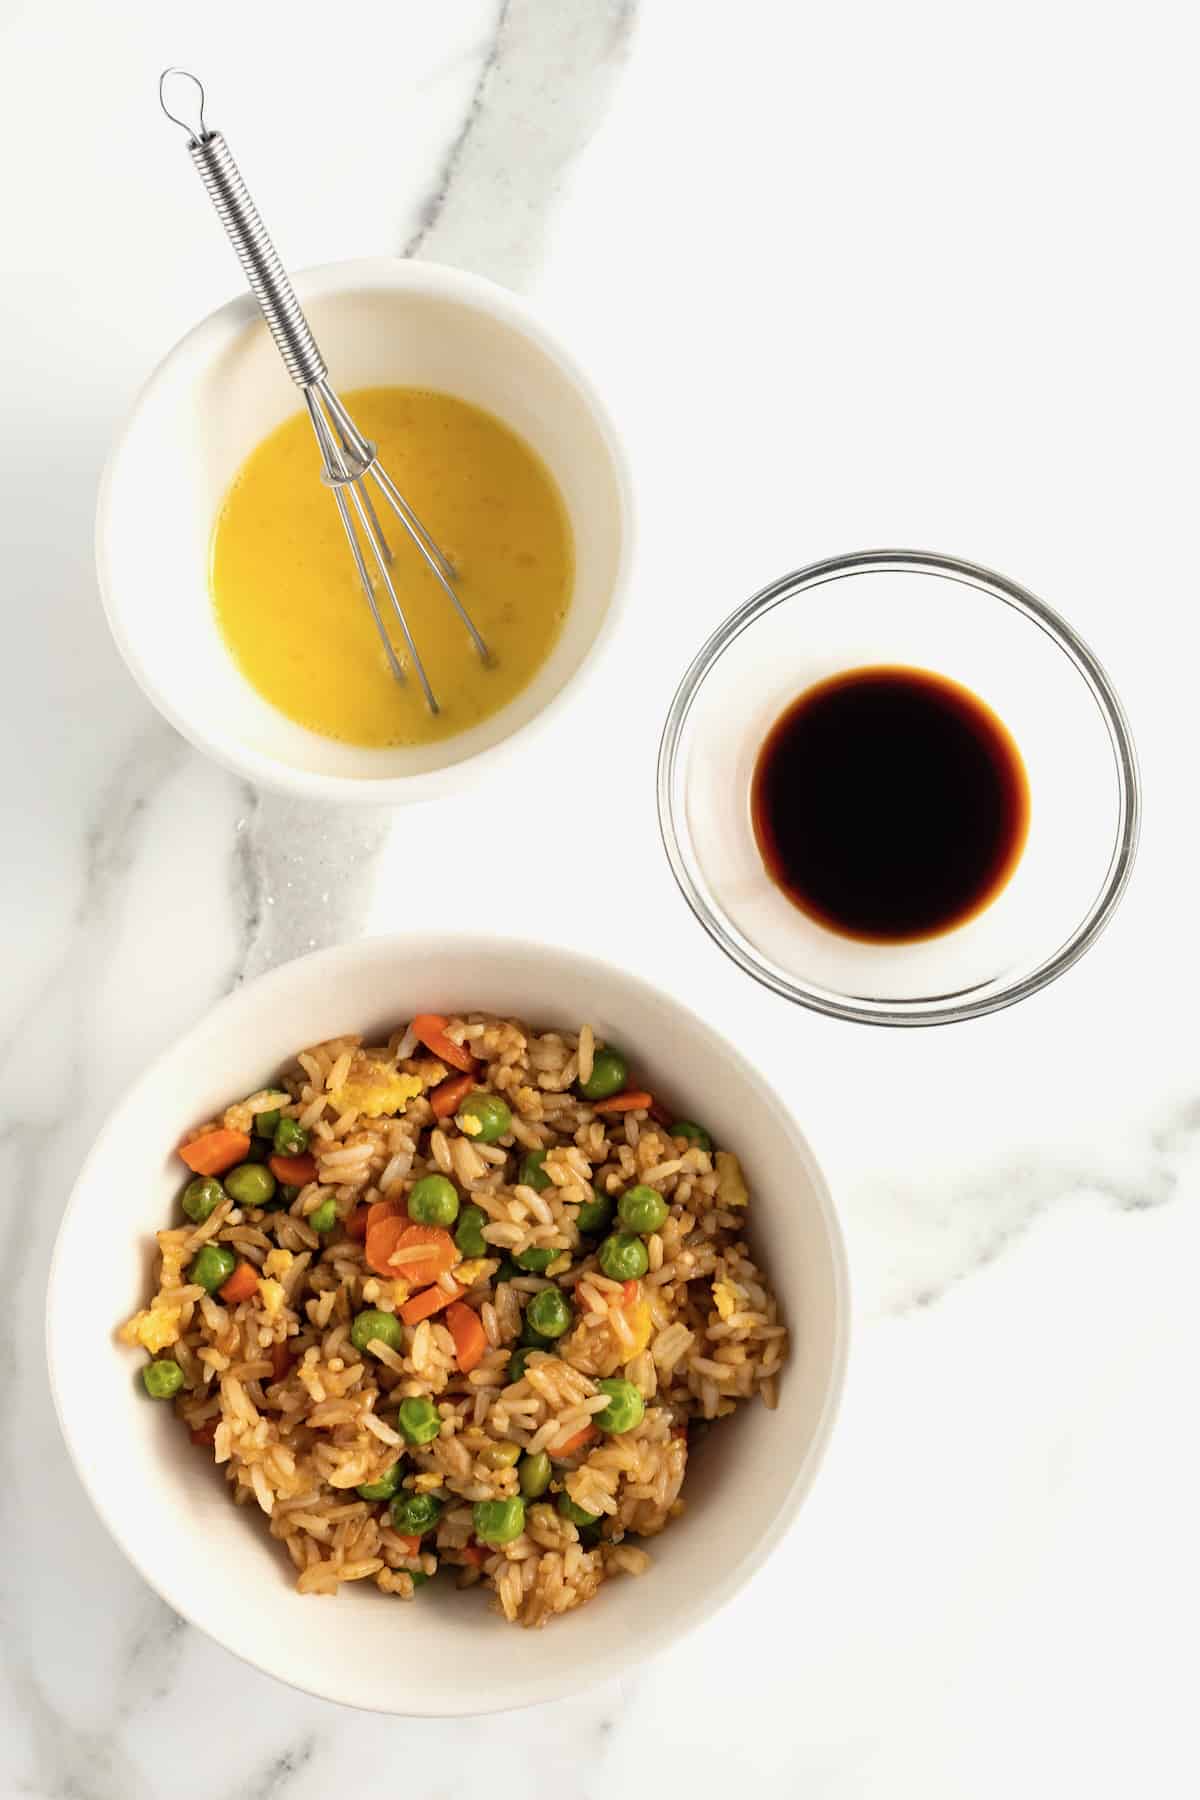 Leftover fried rice, beaten egg, and soy sauce in small glass dishes.